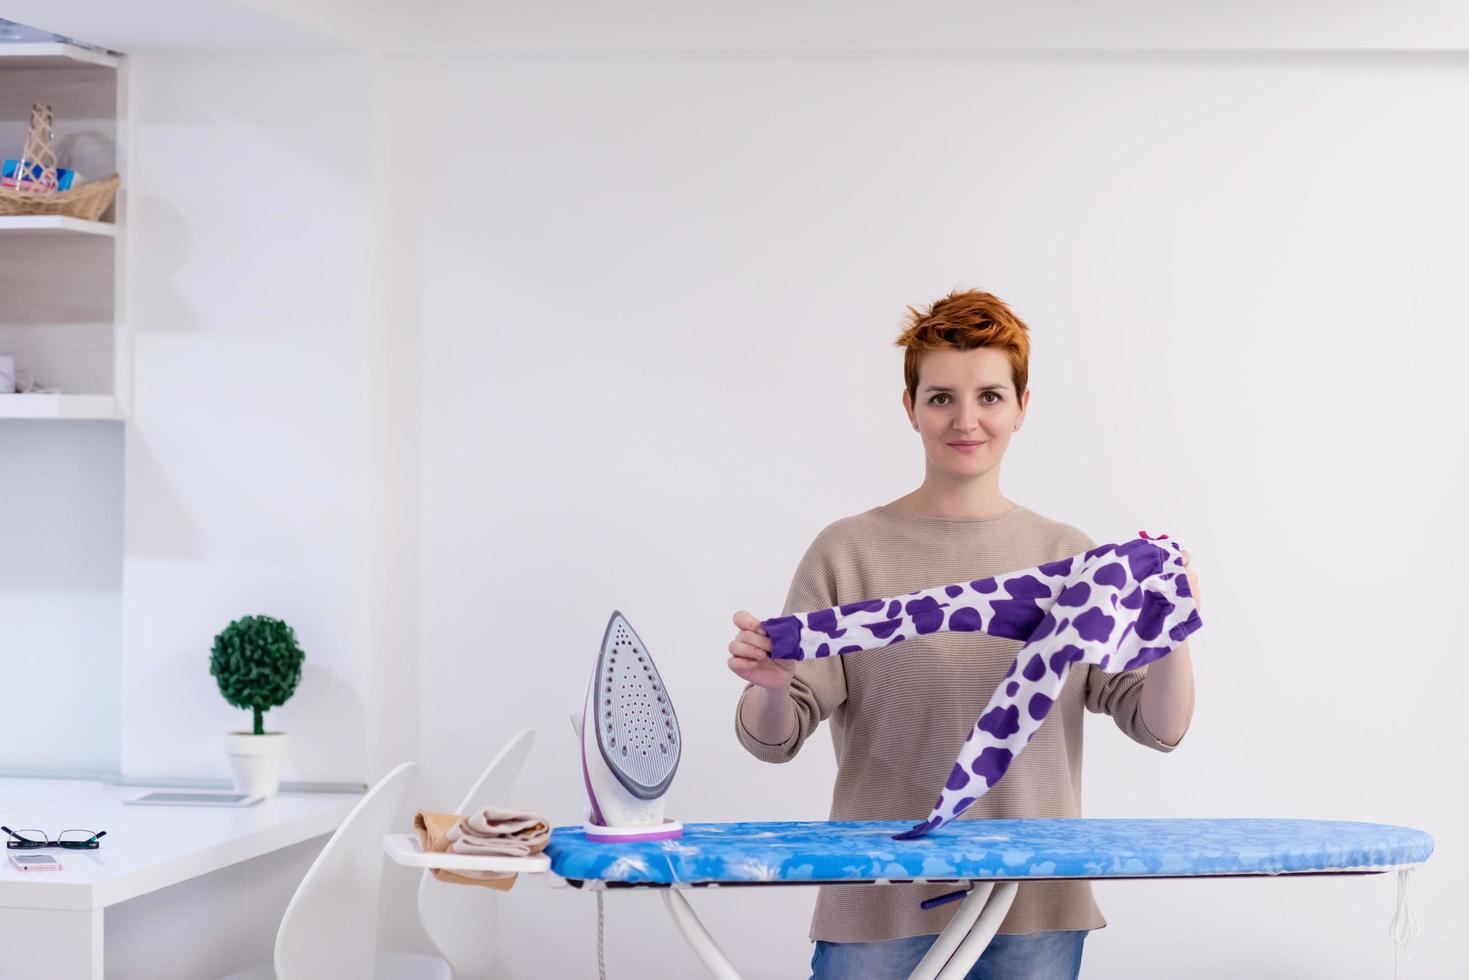 Red haired woman ironing clothes at home photo